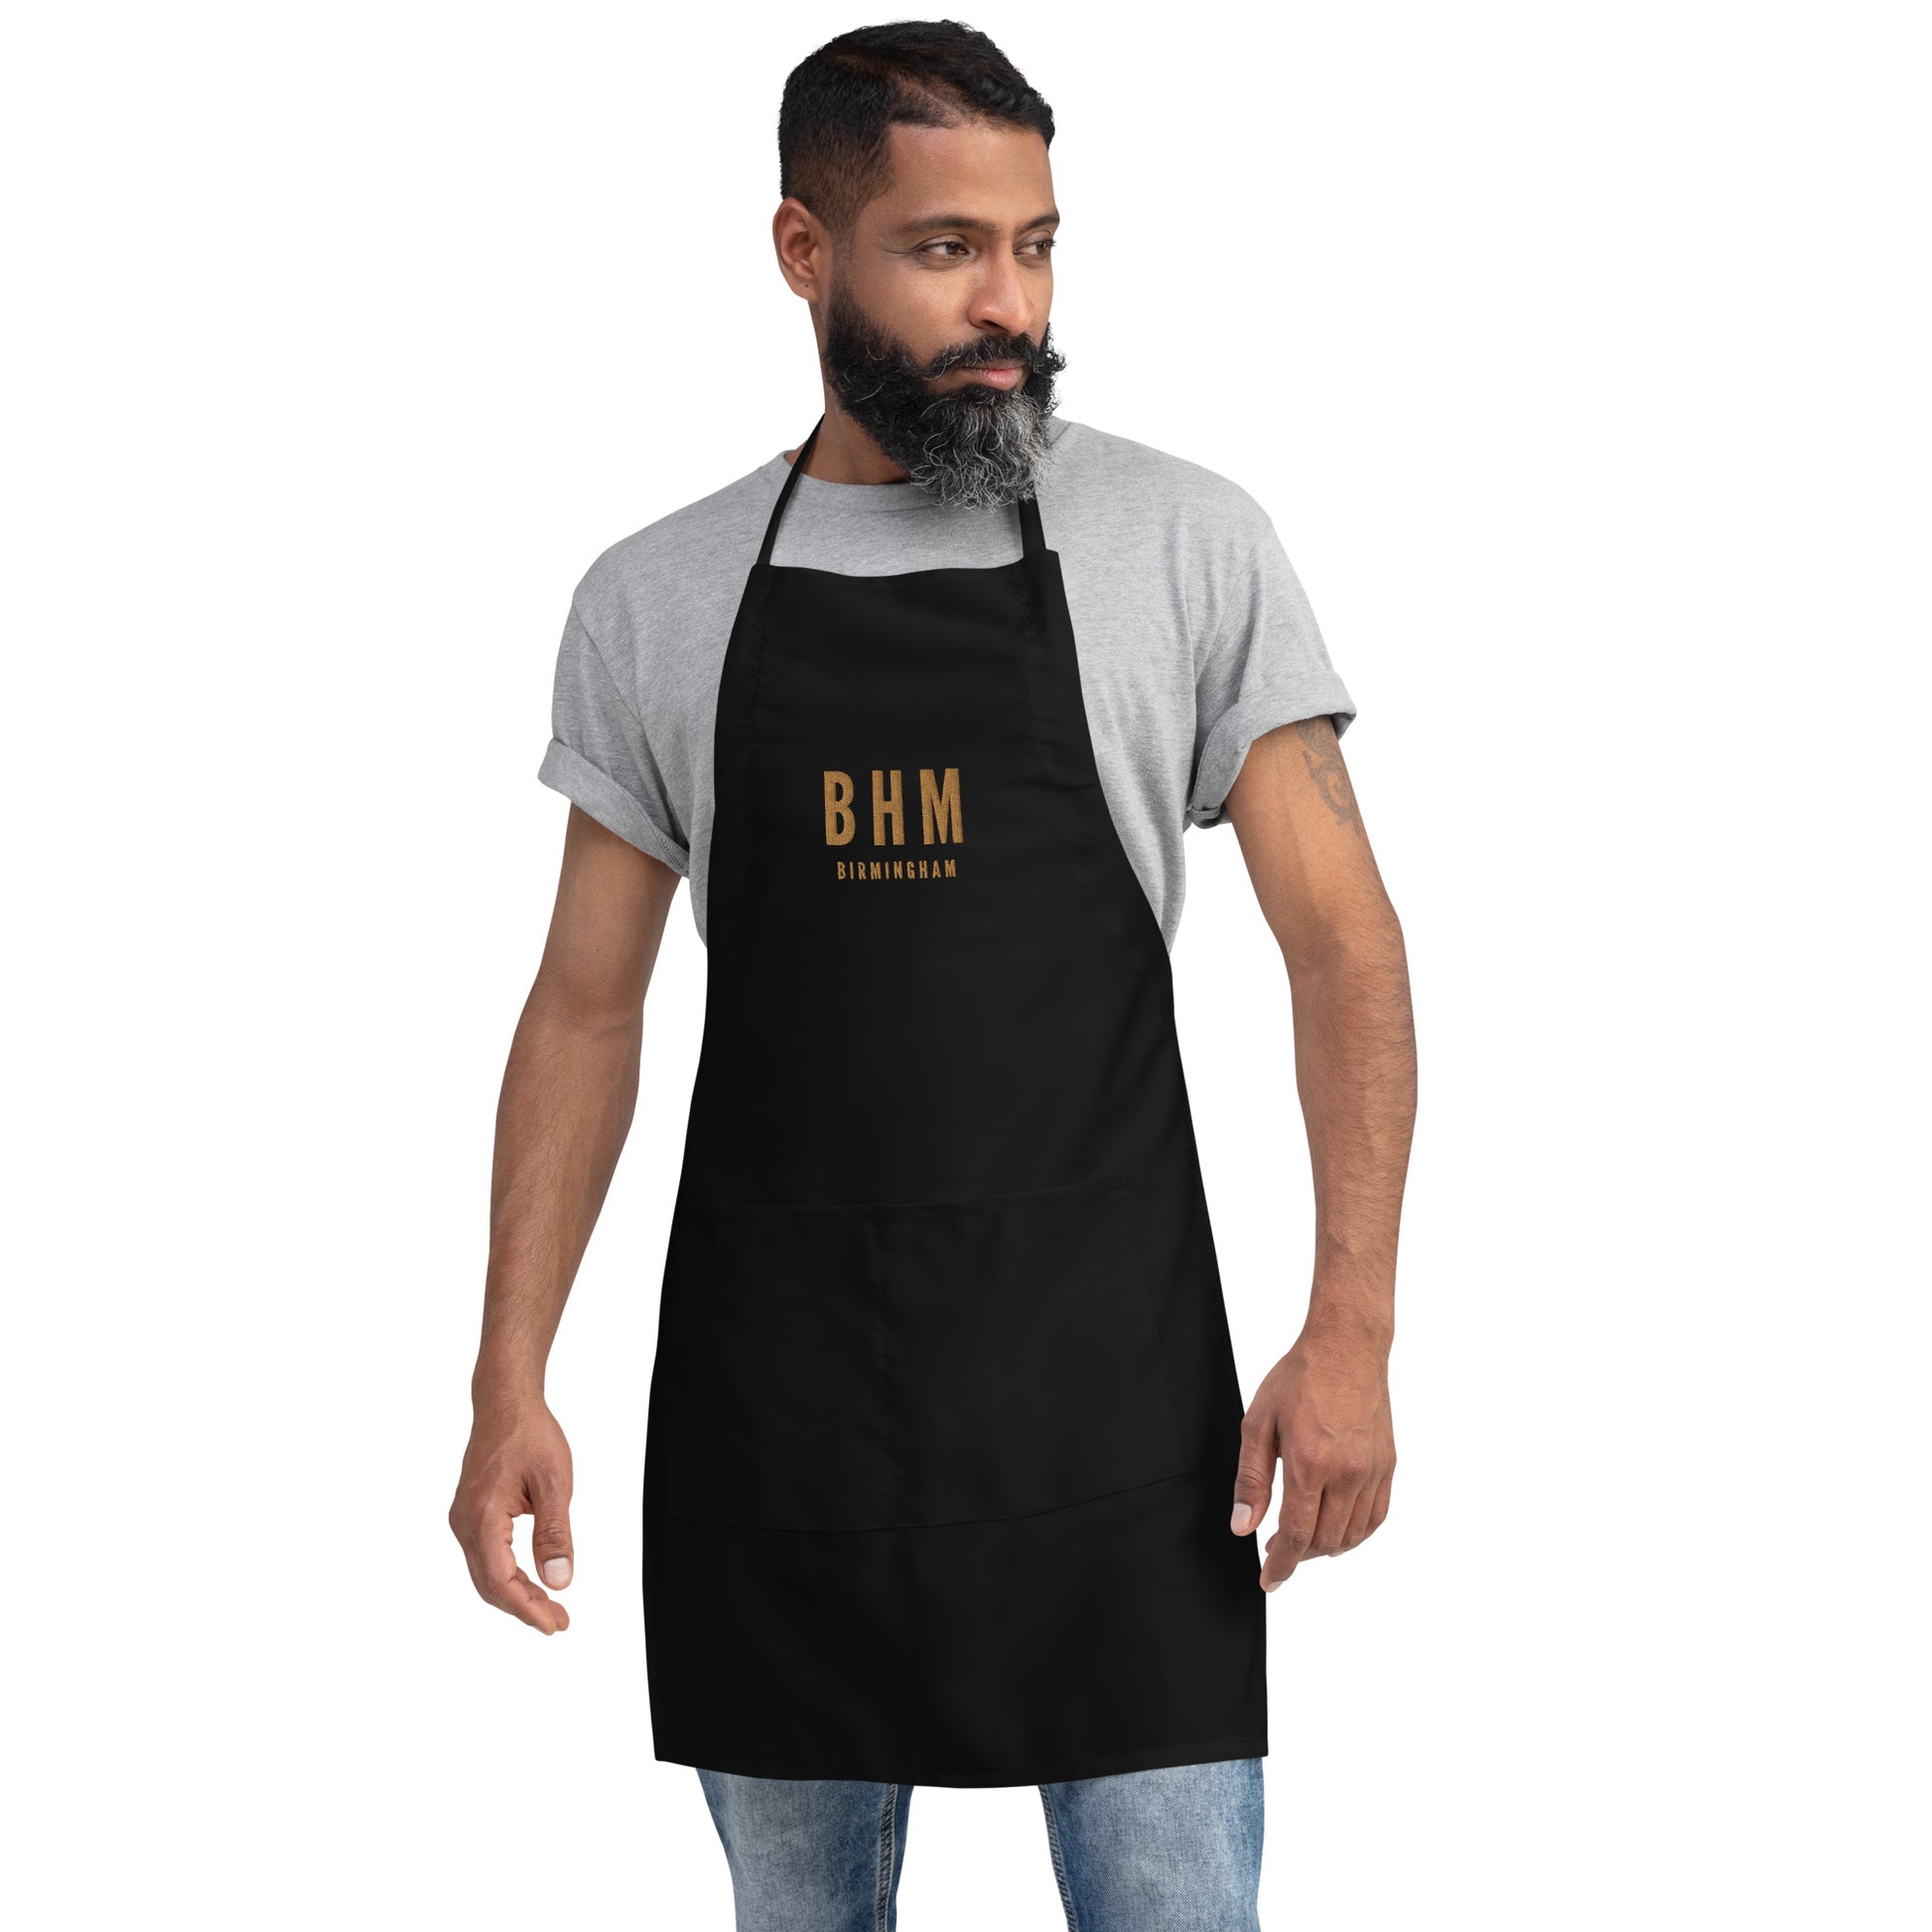 City Embroidered Apron - Old Gold • BHM Birmingham • YHM Designs - Image 05